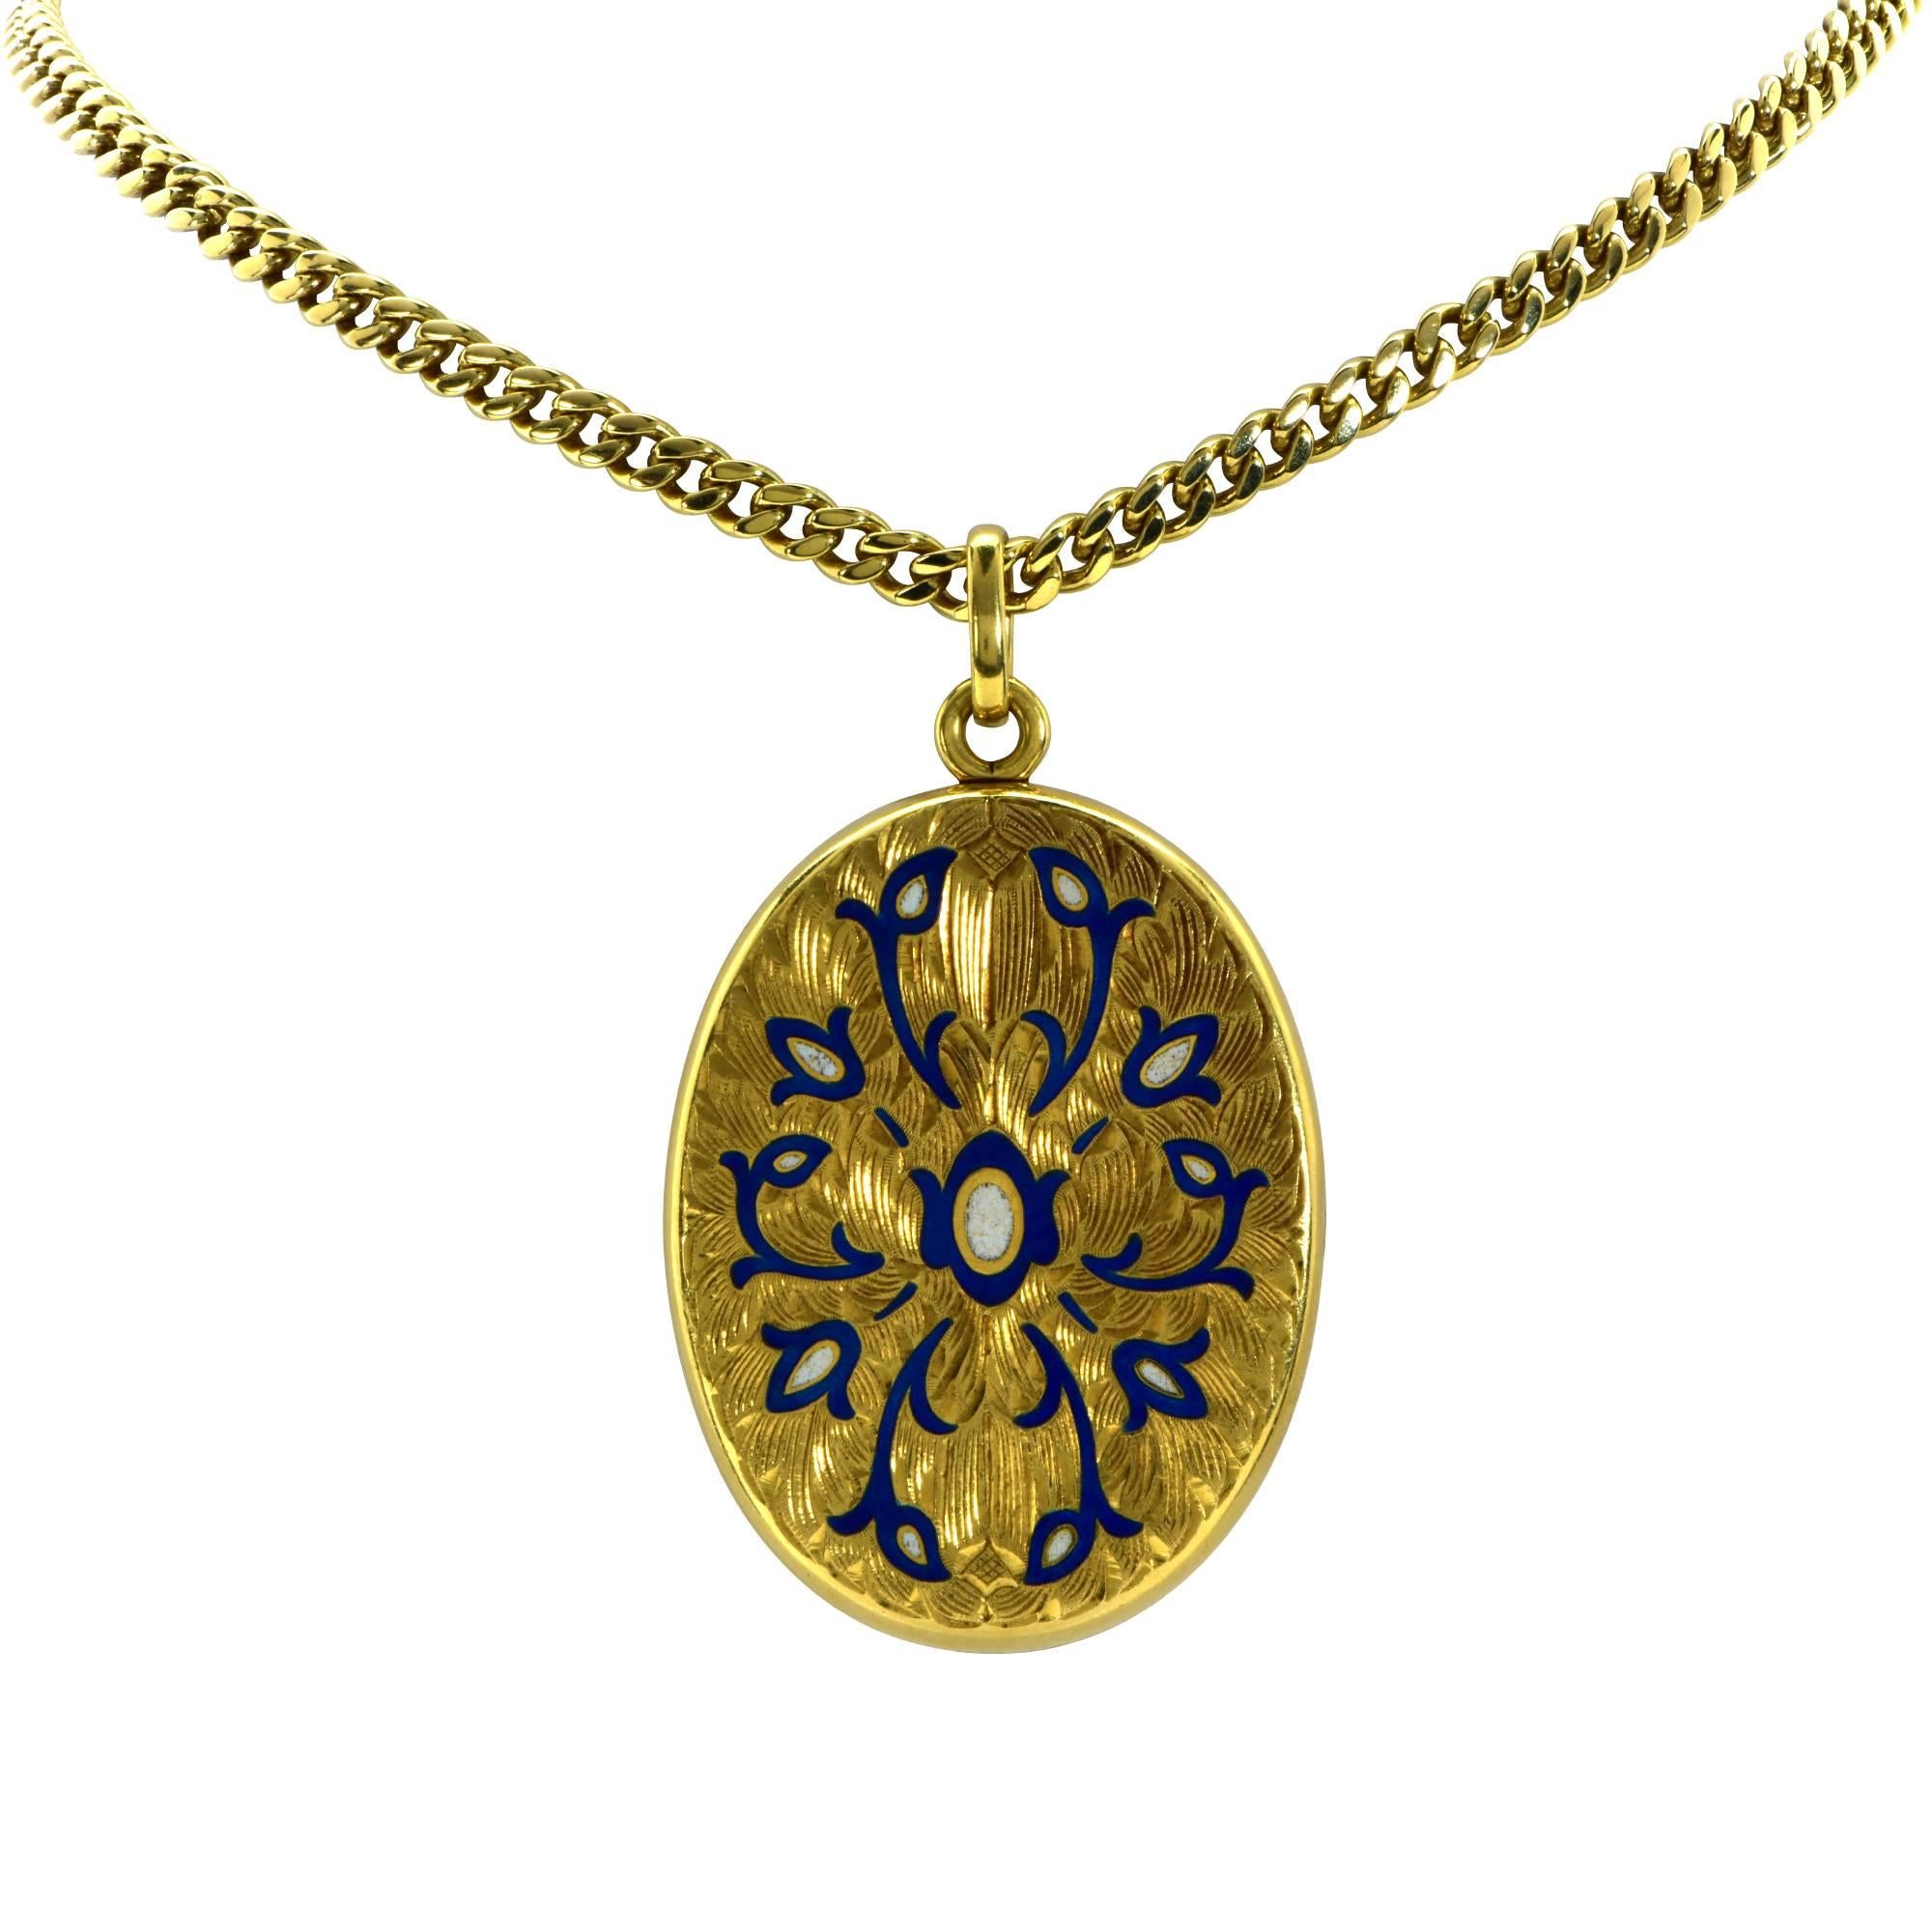 18k yellow gold pendant locket accented by fine engraving as well as blue and white enamel.

The chain measures 24 inches long and the locket measures 1.75 inches in height by 1.35 inches in width.
It is stamped and/or tested as 18k gold.
The metal